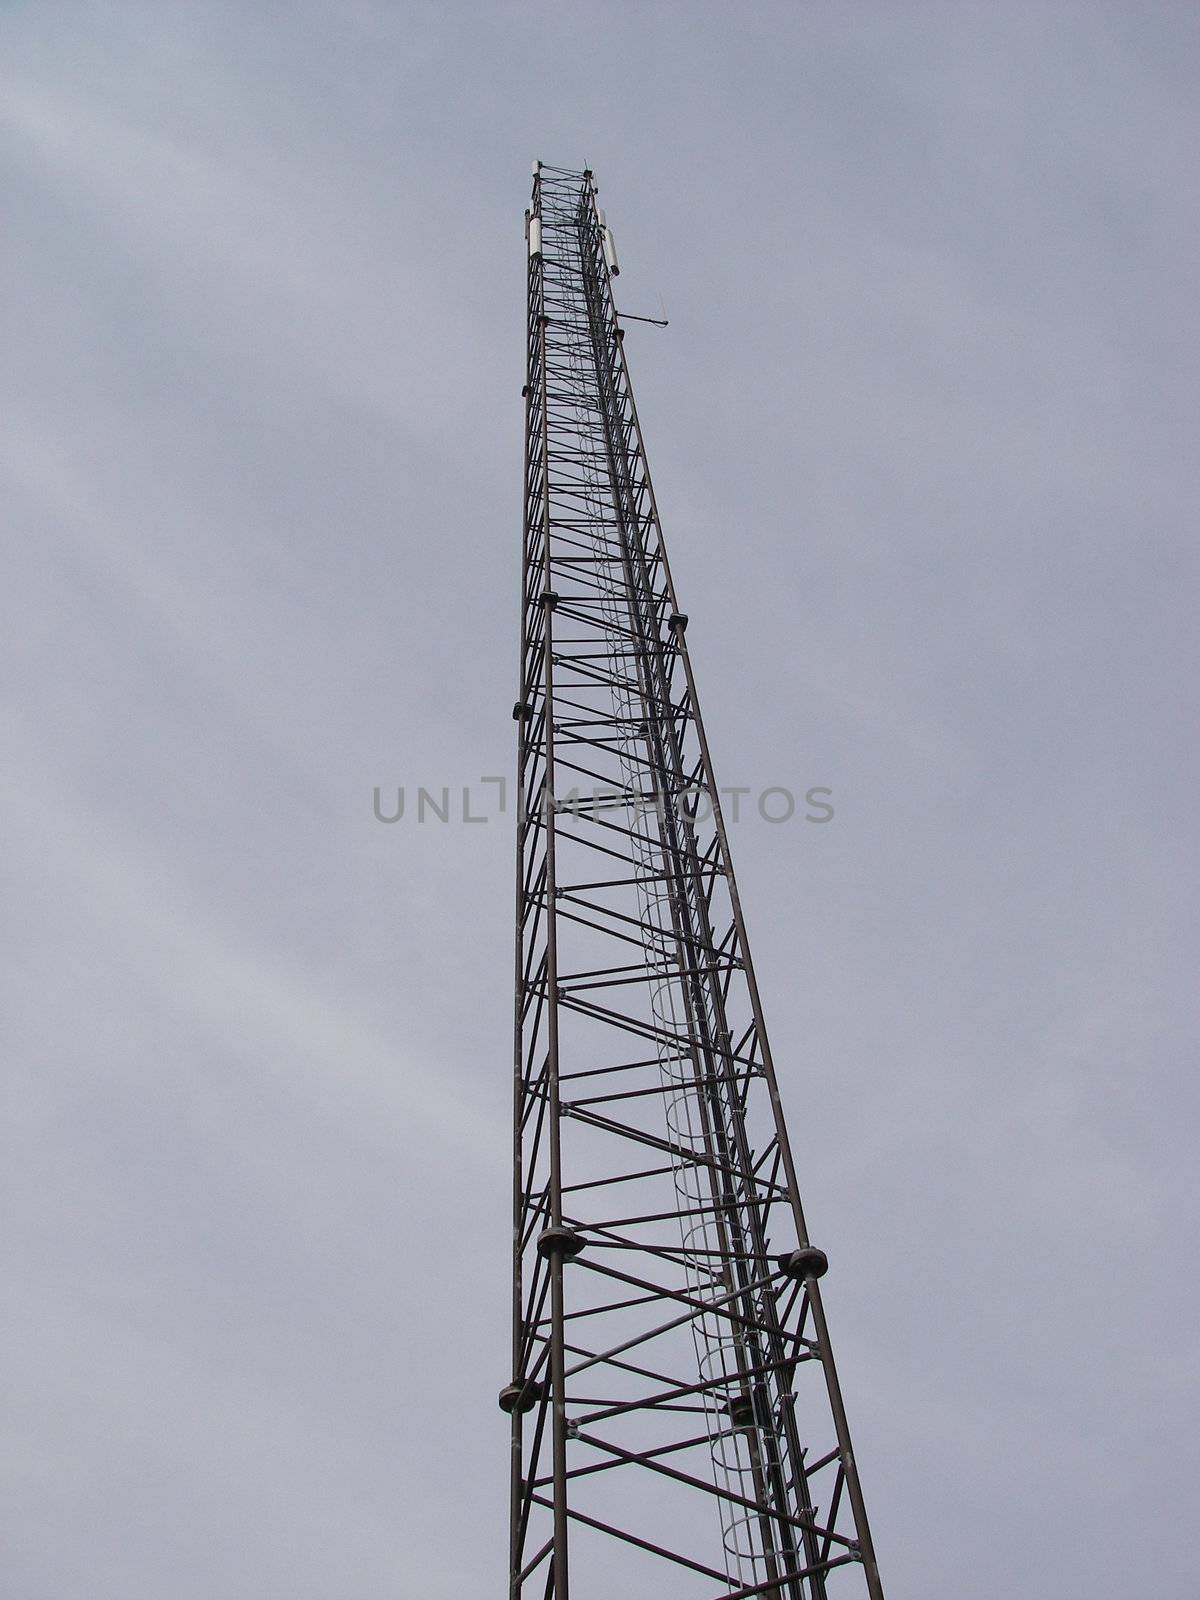 portrait of endless communication-tower reach for sky on smooth background